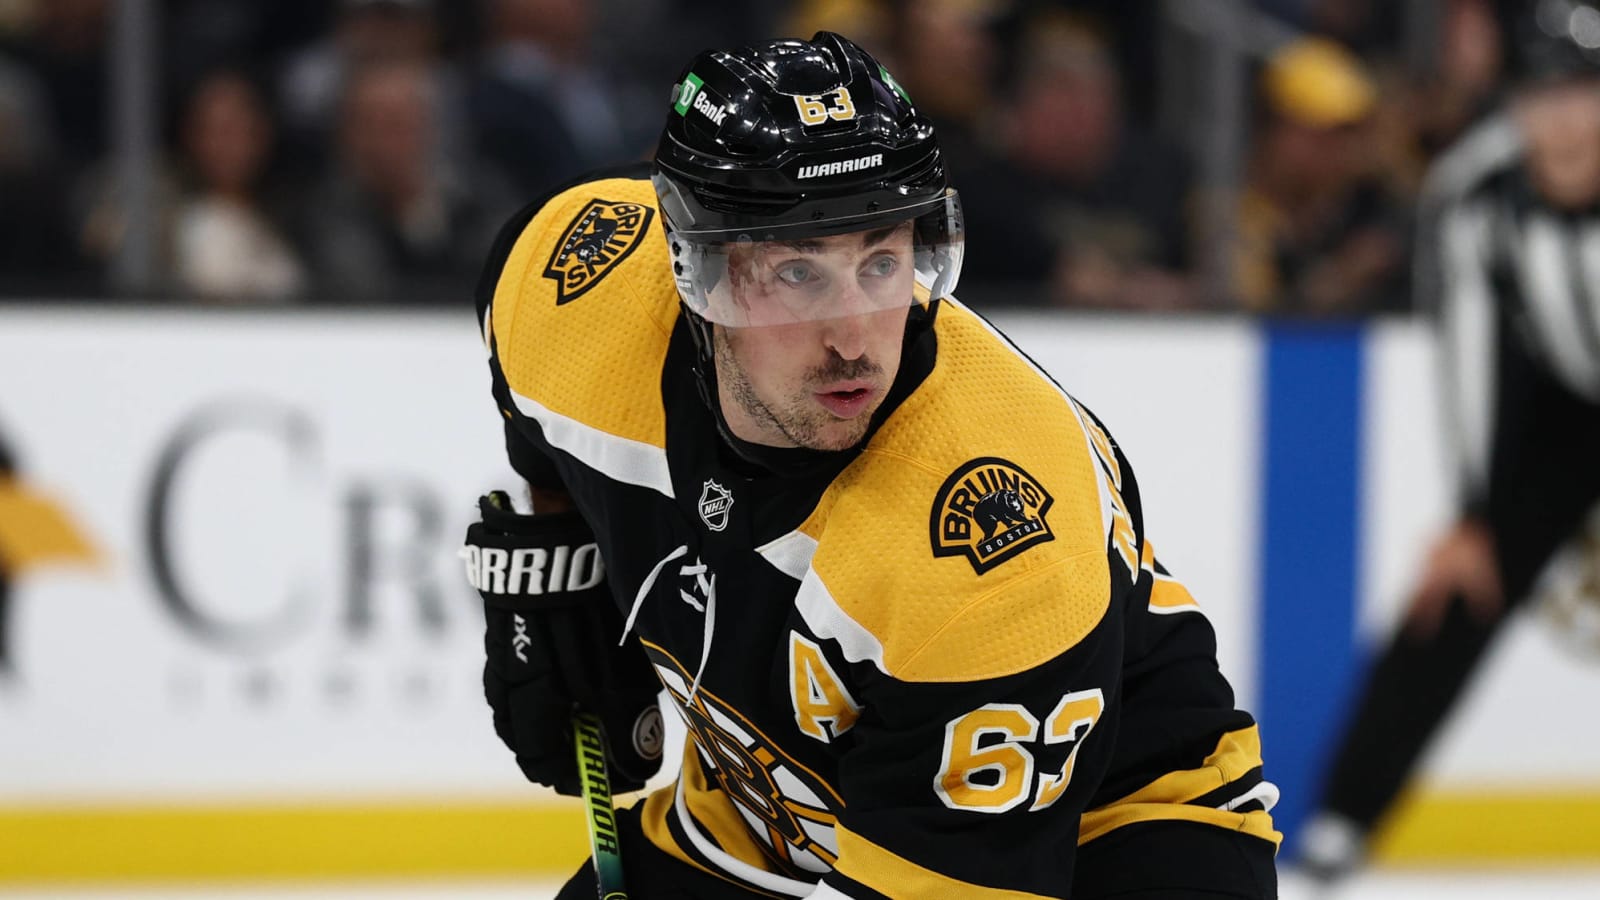 Bruins' Marchand to have hearing with Dept. of Player Safety